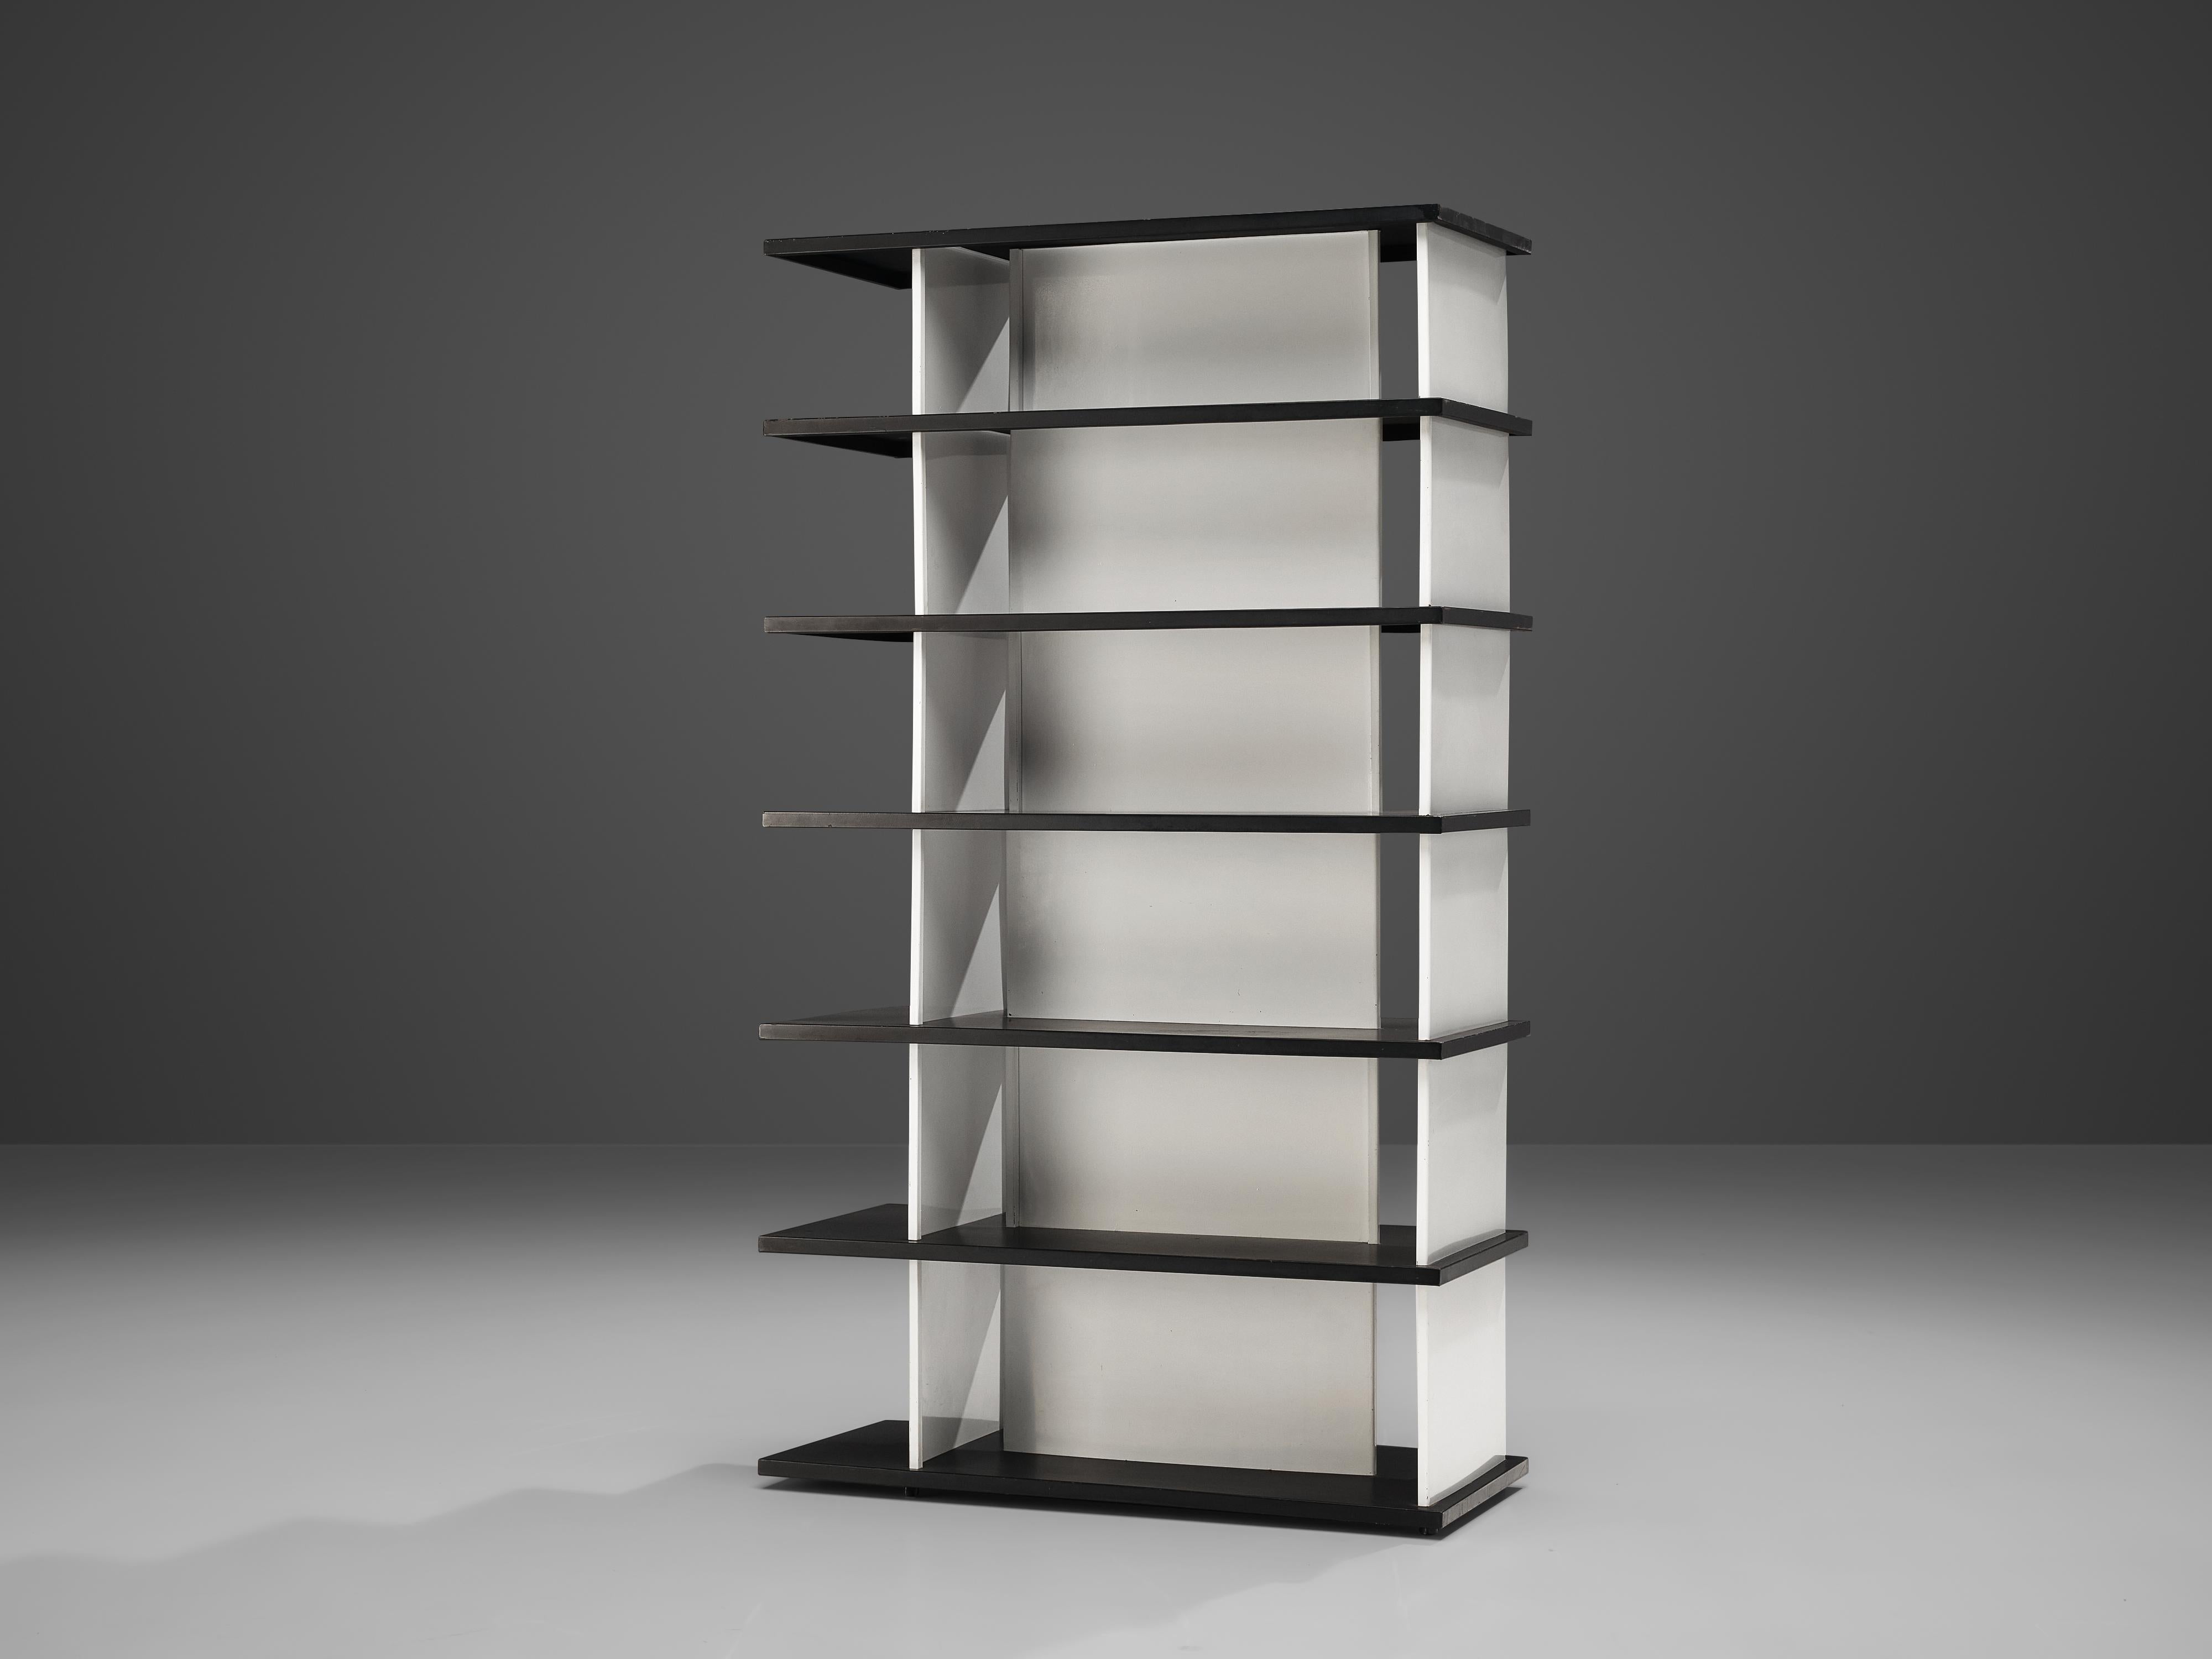 Wim Rietveld, bookcase, black and white coated metal, The Netherlands, 1960.

This free-standing bookcase was originally designed by Wim Rietveld for the famous Dutch high-end department store De Bijenkorf in 1960. The clear structure of the shelf